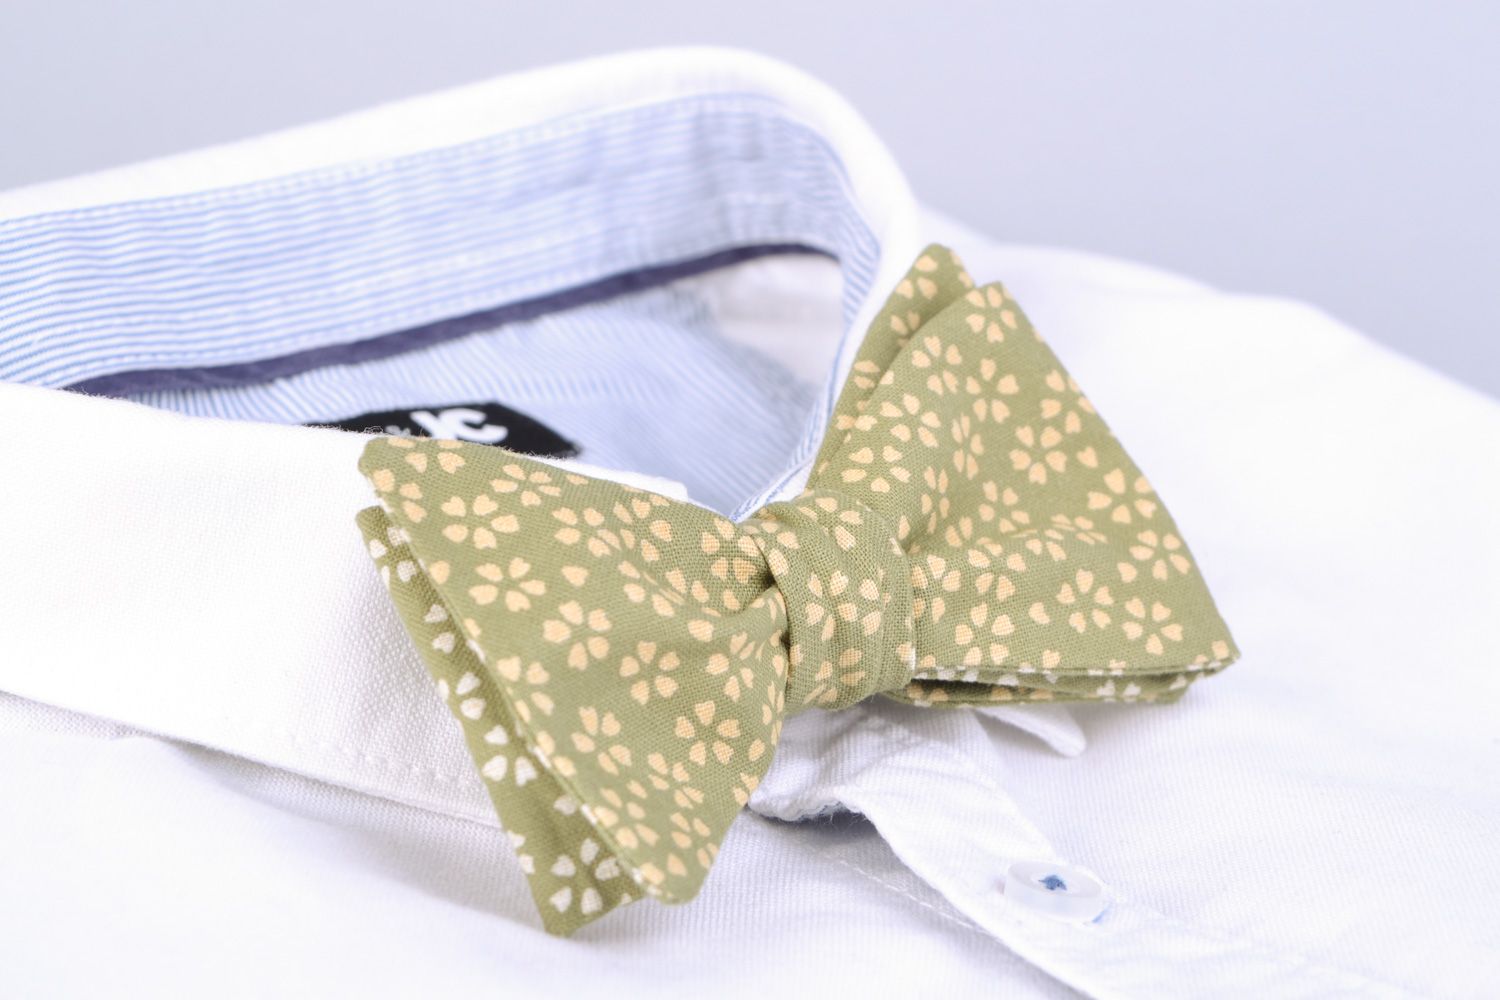 Handmade bow tie sewn of cotton fabric with floral pattern in calm color palette photo 1